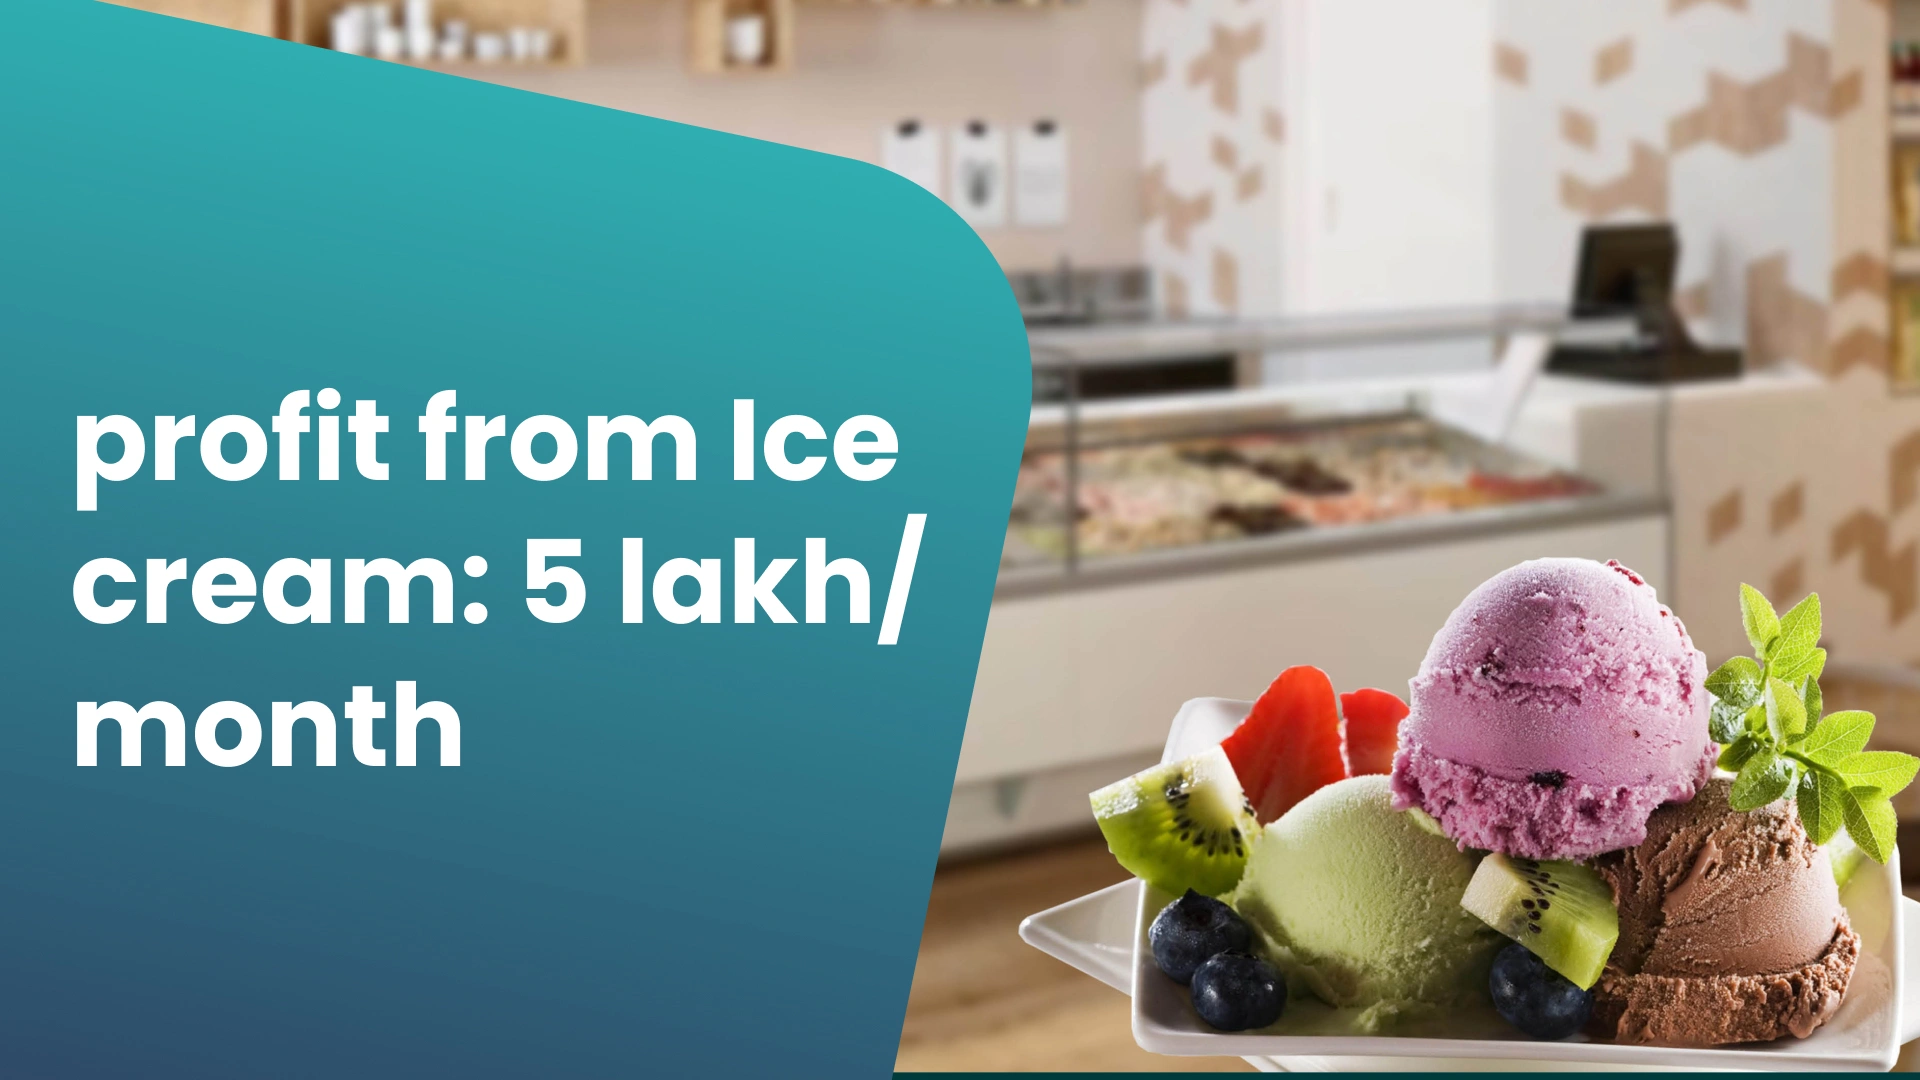 Course Trailer: Ice Cream Business - Make Rs 3 to 5 lakh+ per month. Watch to know more.